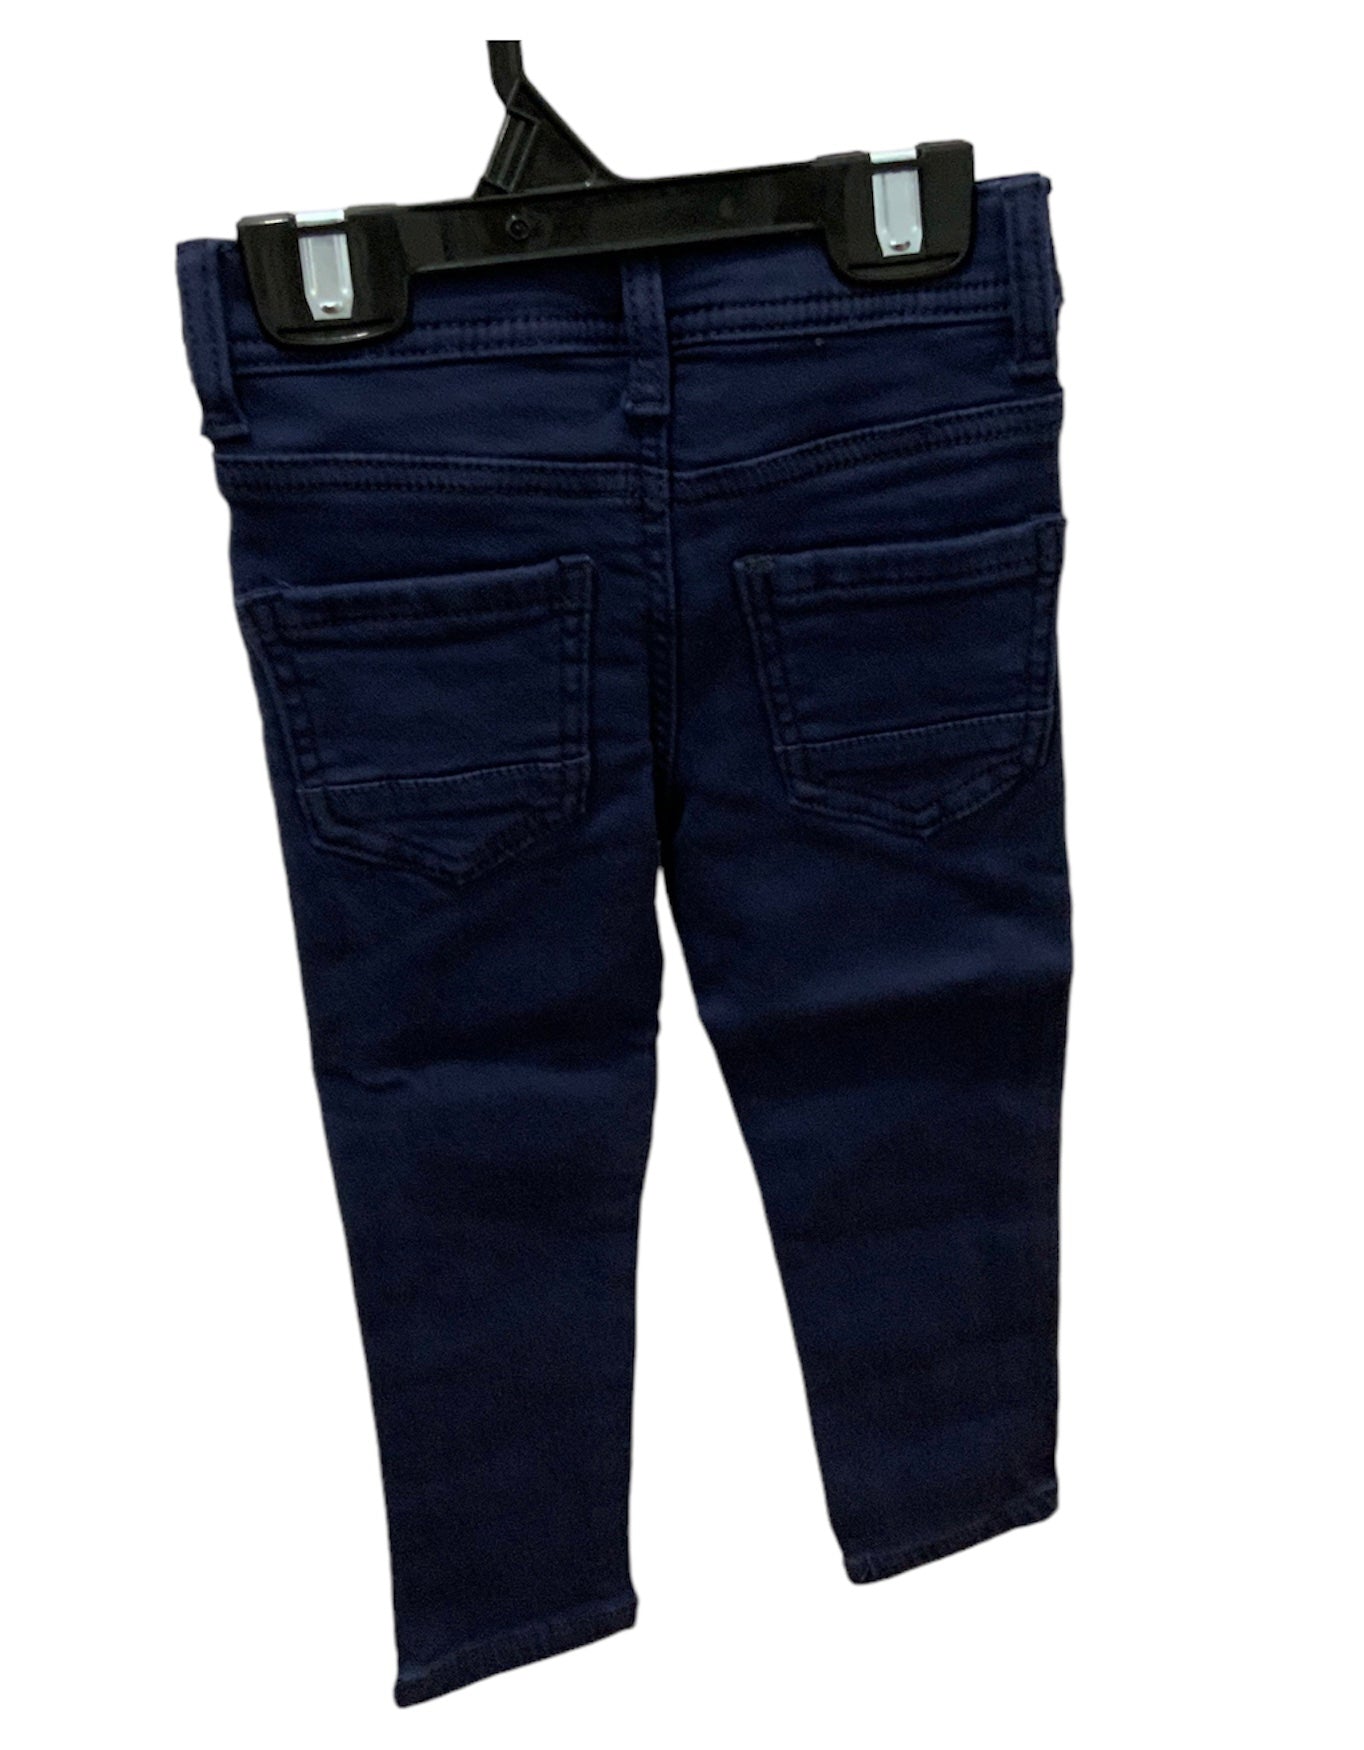 Northcoast Straight Fit Twill Pant-W24